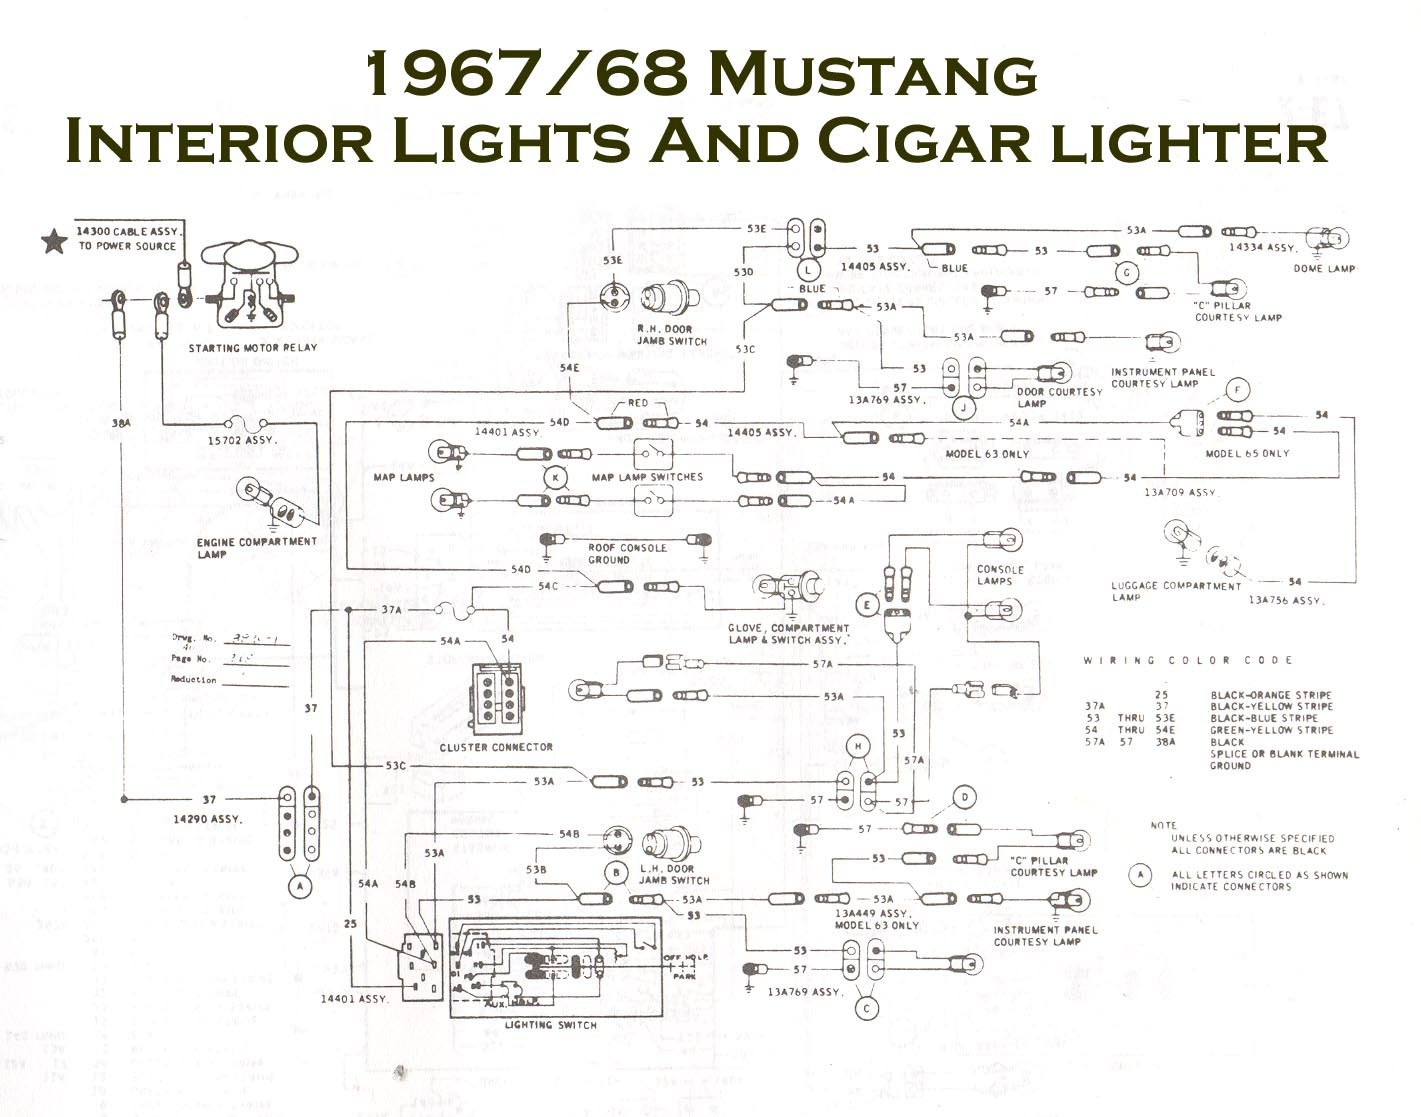 1968 Mustang Turn Signal Wiring Diagram from jacobsonrs.tripod.com